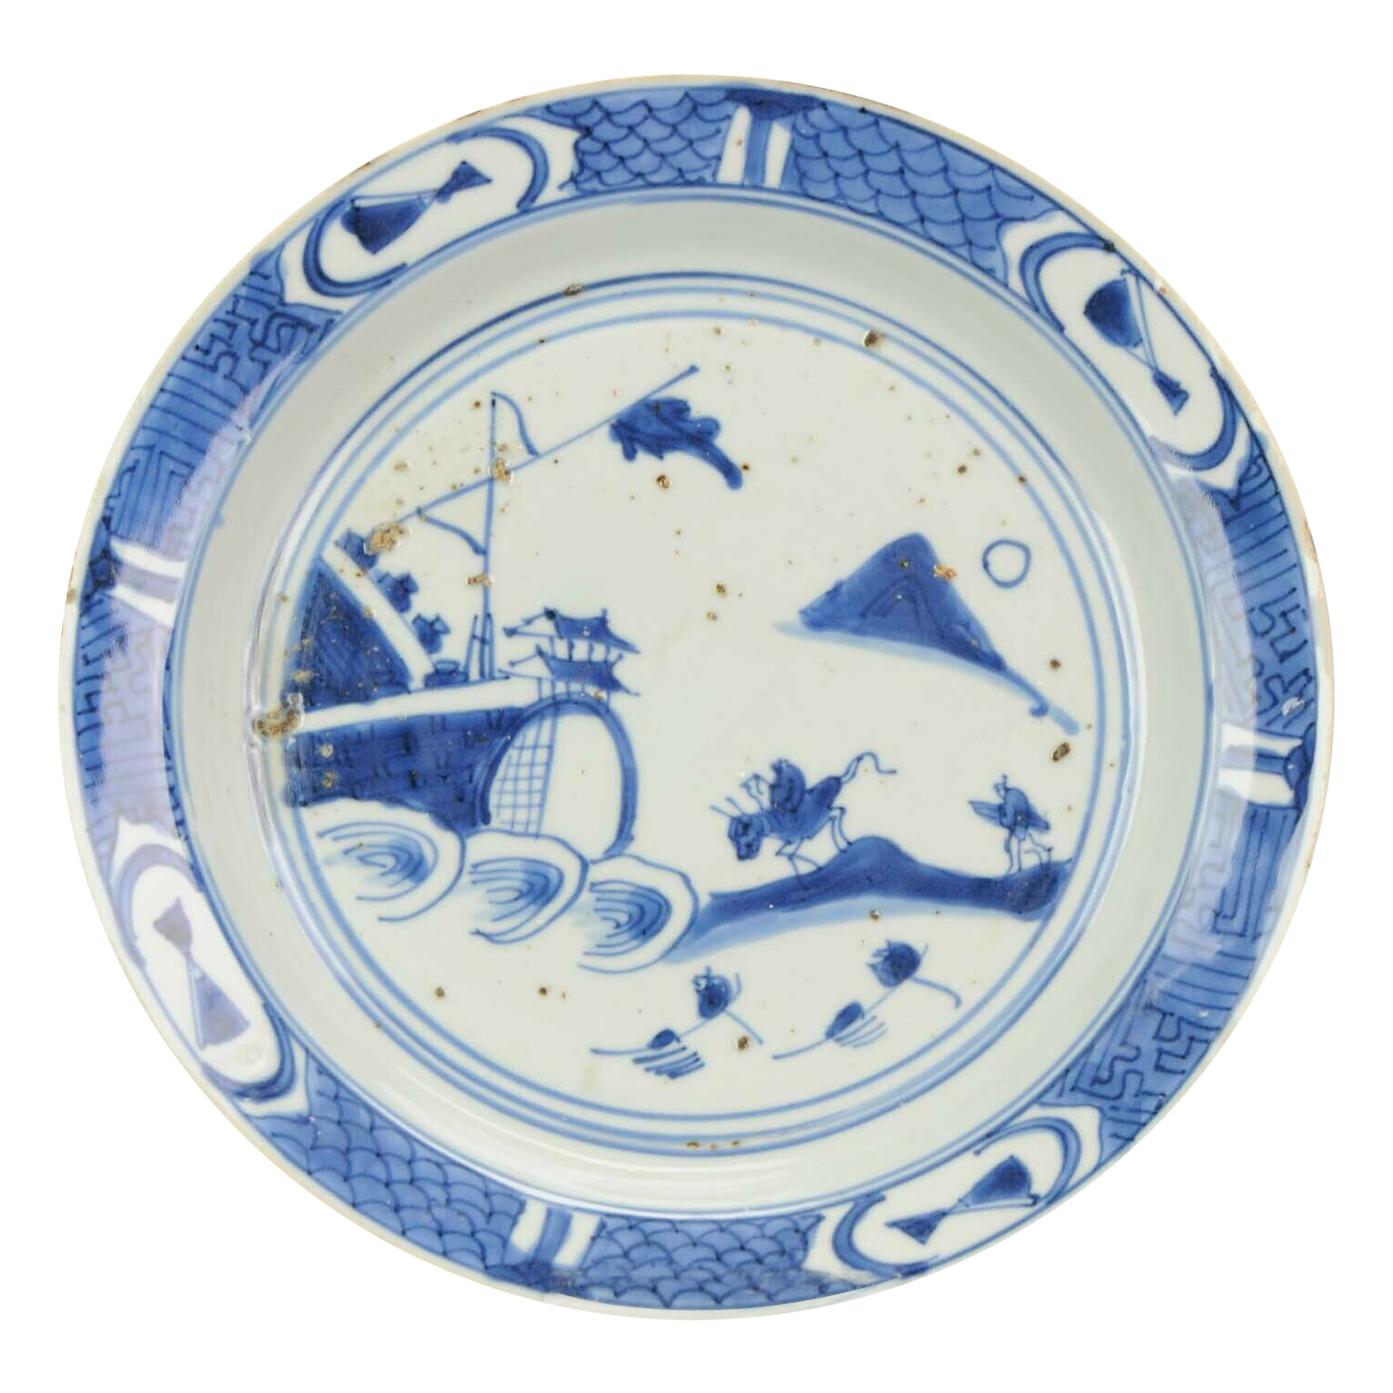 The exact selection can vary from the picture due to stock changes.

A set of 30 plates from the early 17th century. Variation on a theme. Late Ming dynasty blue and white plates with scholars, teachers, attendants, students and travellers. The